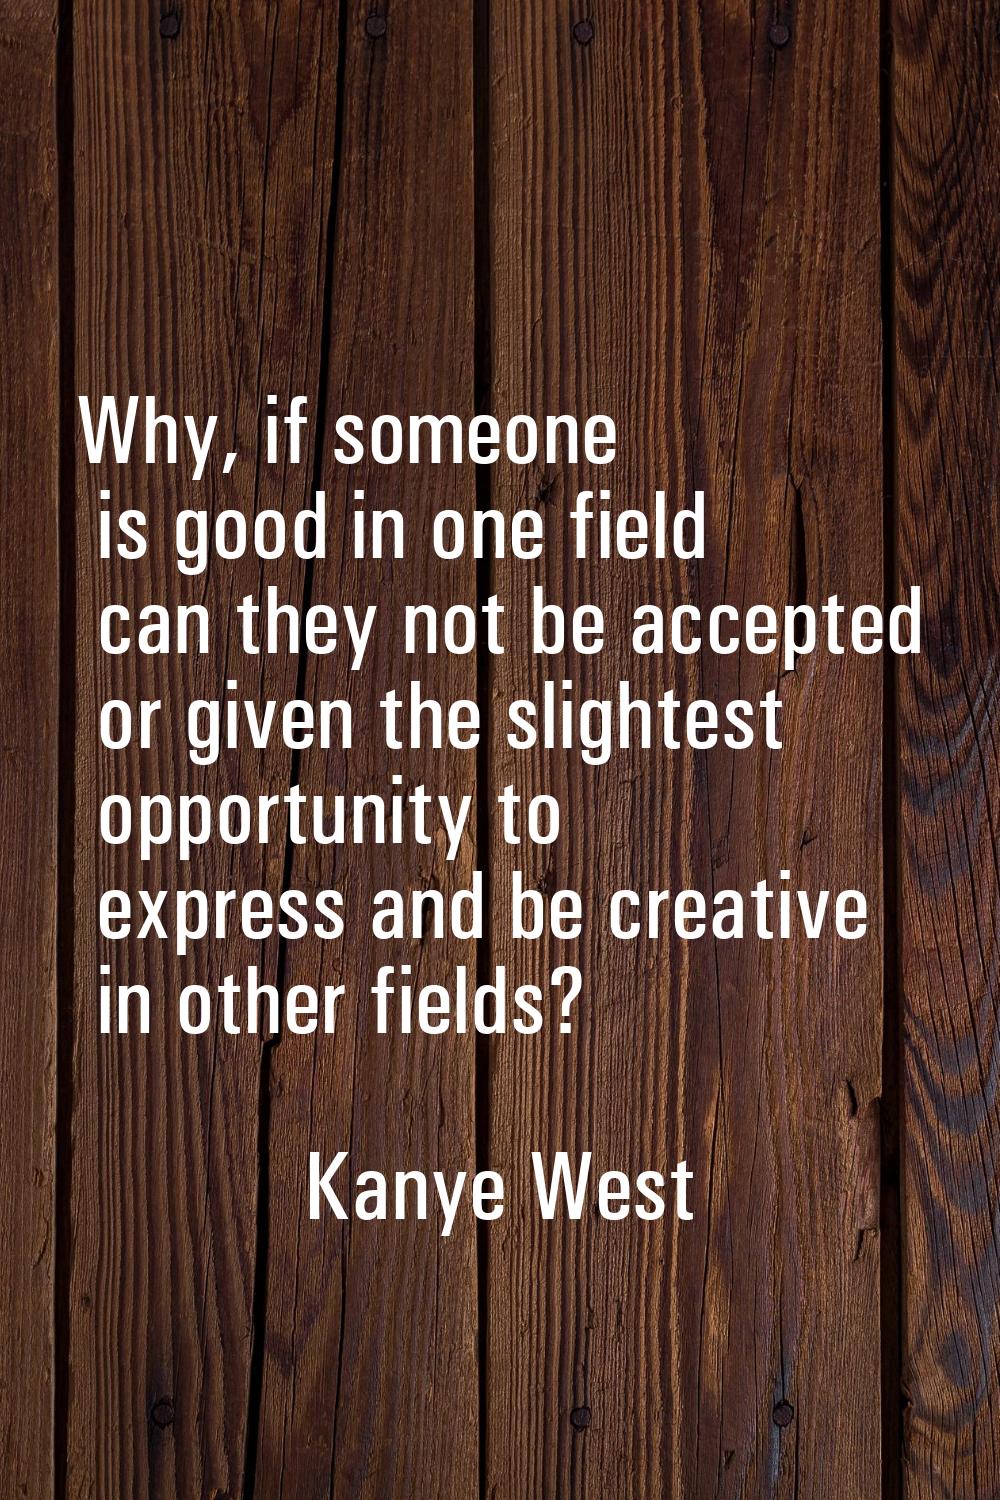 Why, if someone is good in one field can they not be accepted or given the slightest opportunity to